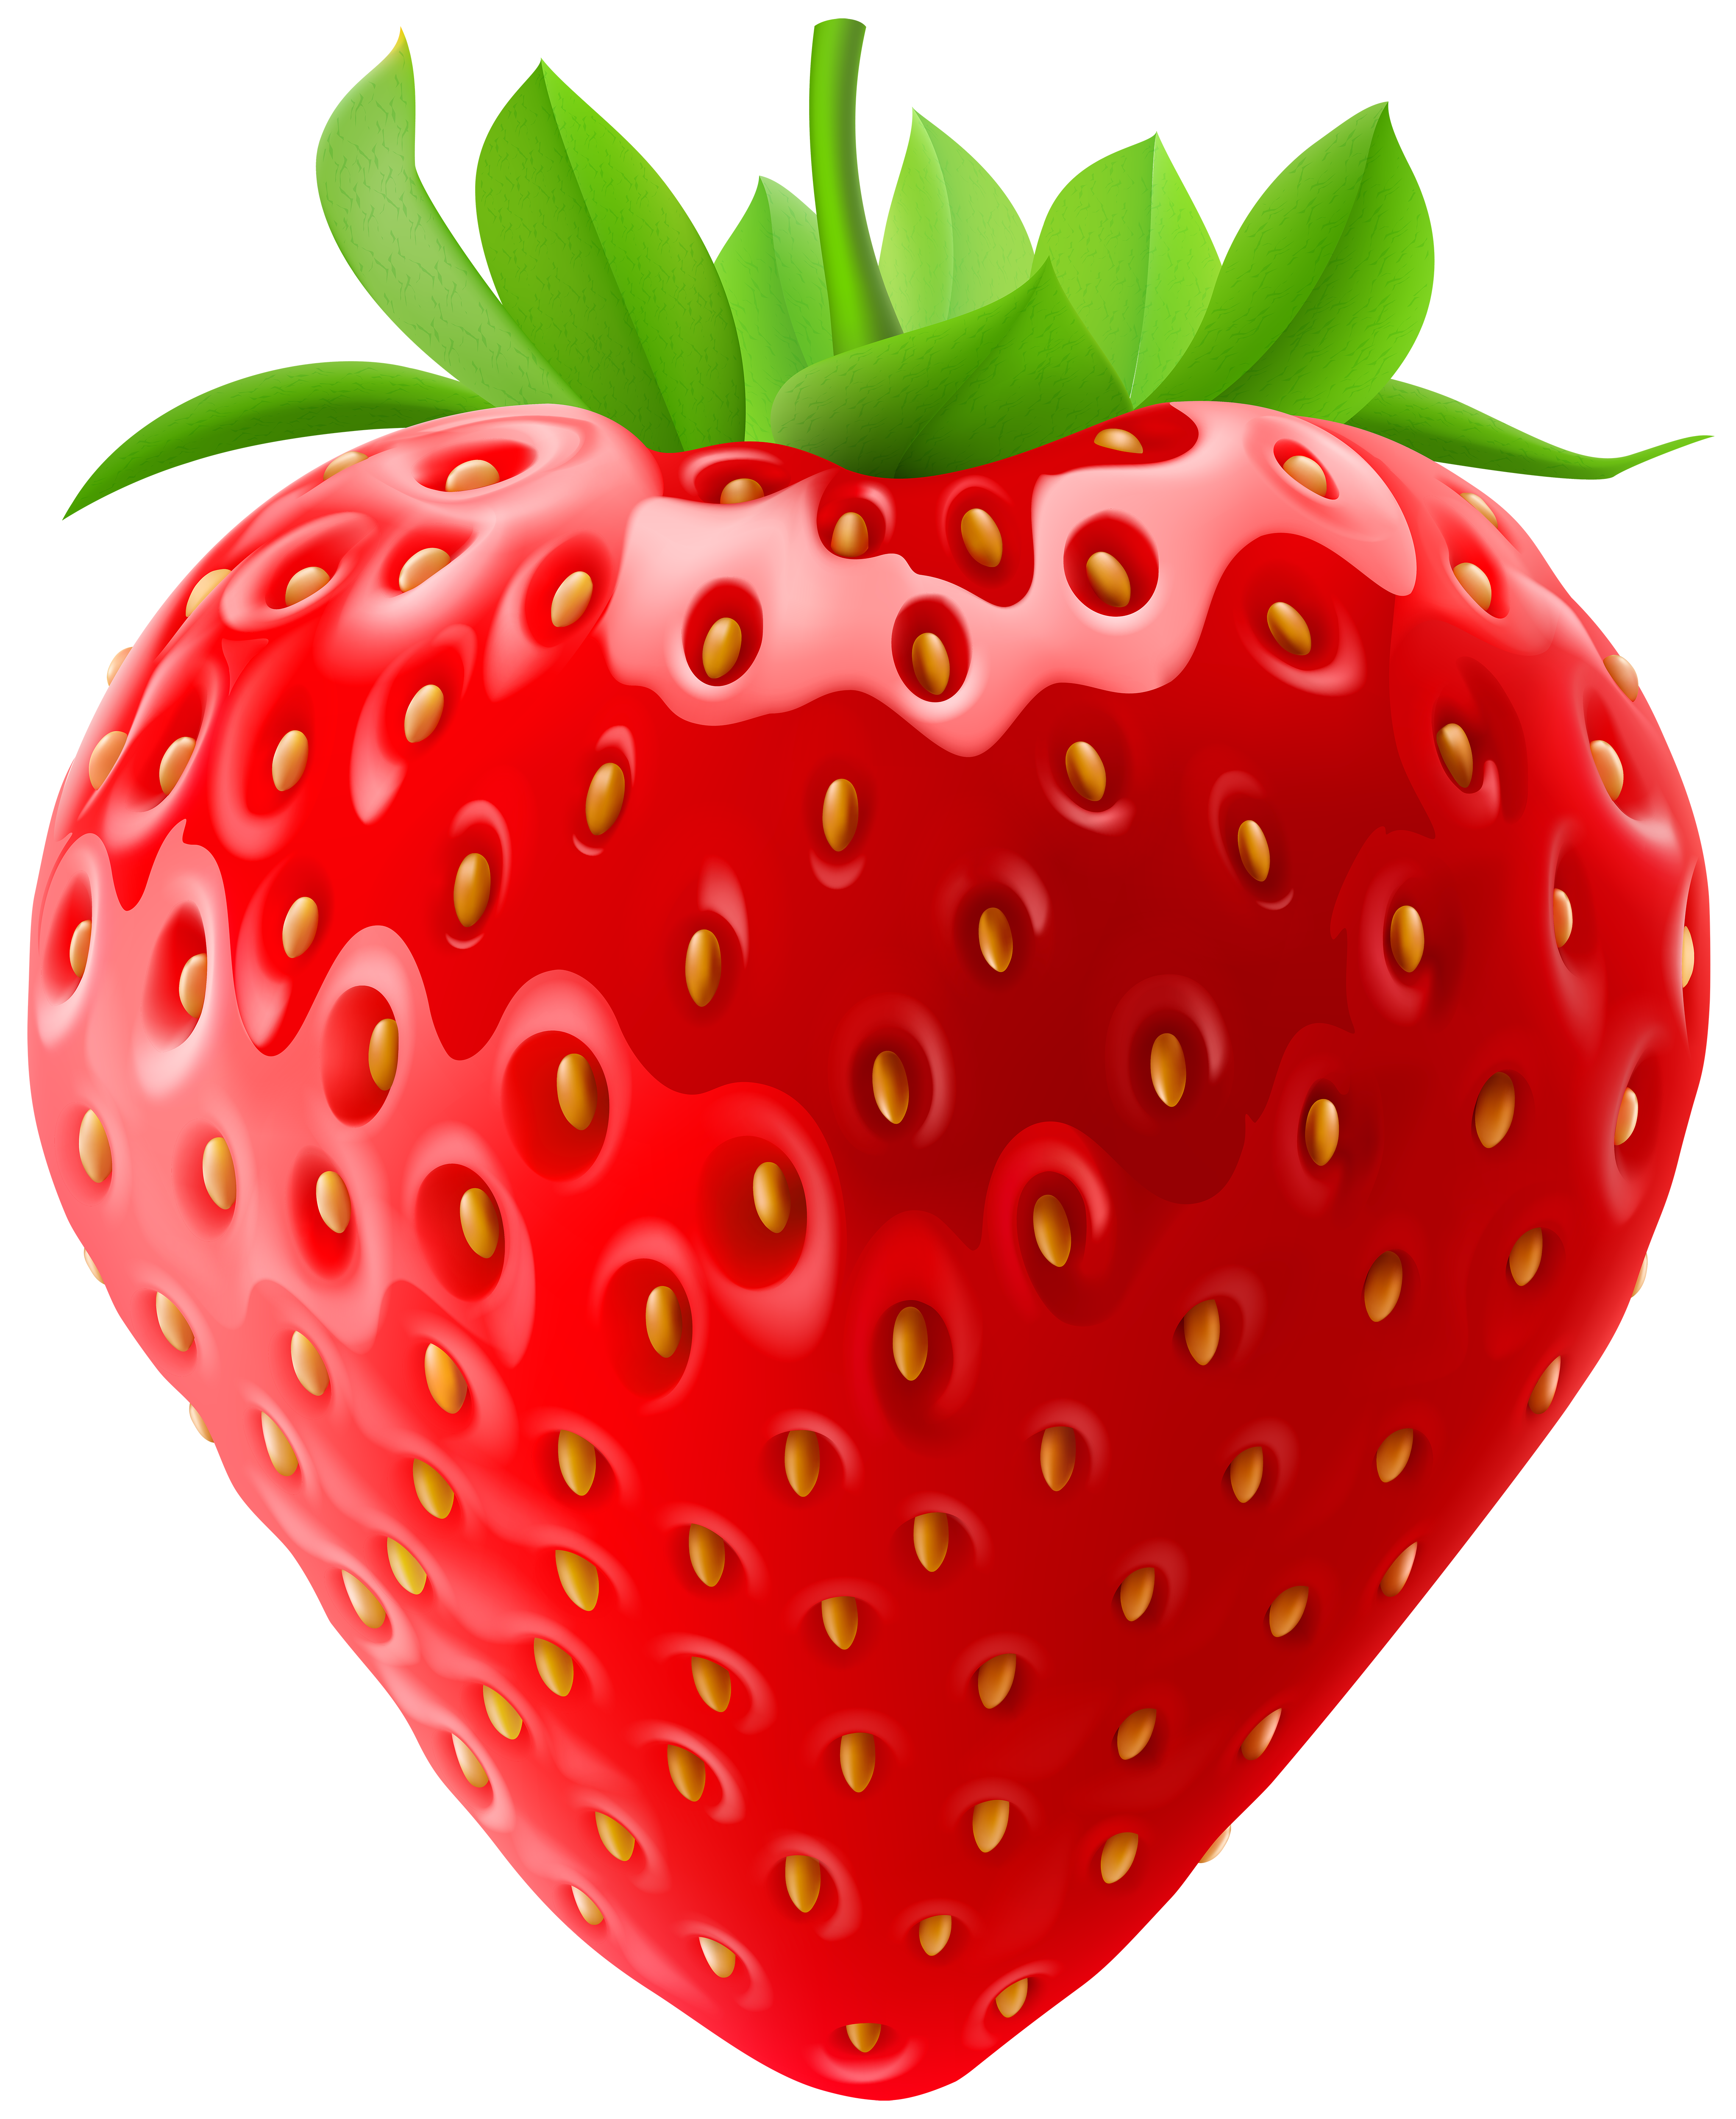 Strawberries clipart strawbery. Strawberry clip art png